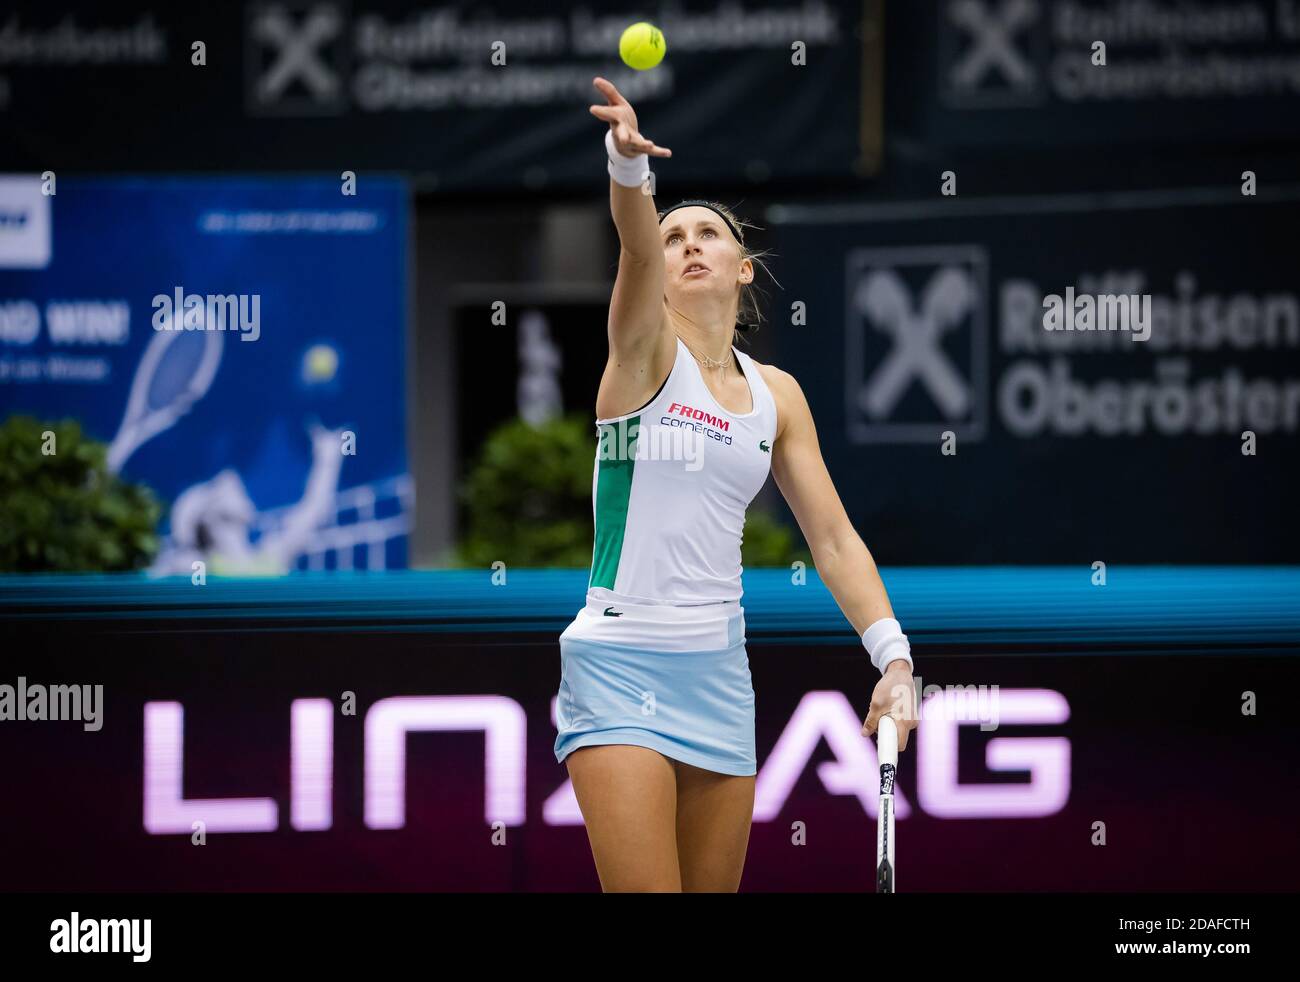 Jil Teichmann of Switzerland in action against Oceane Dodin of France during the first round at the 2020 Upper Austria Ladies Linz WTA International P Stock Photo